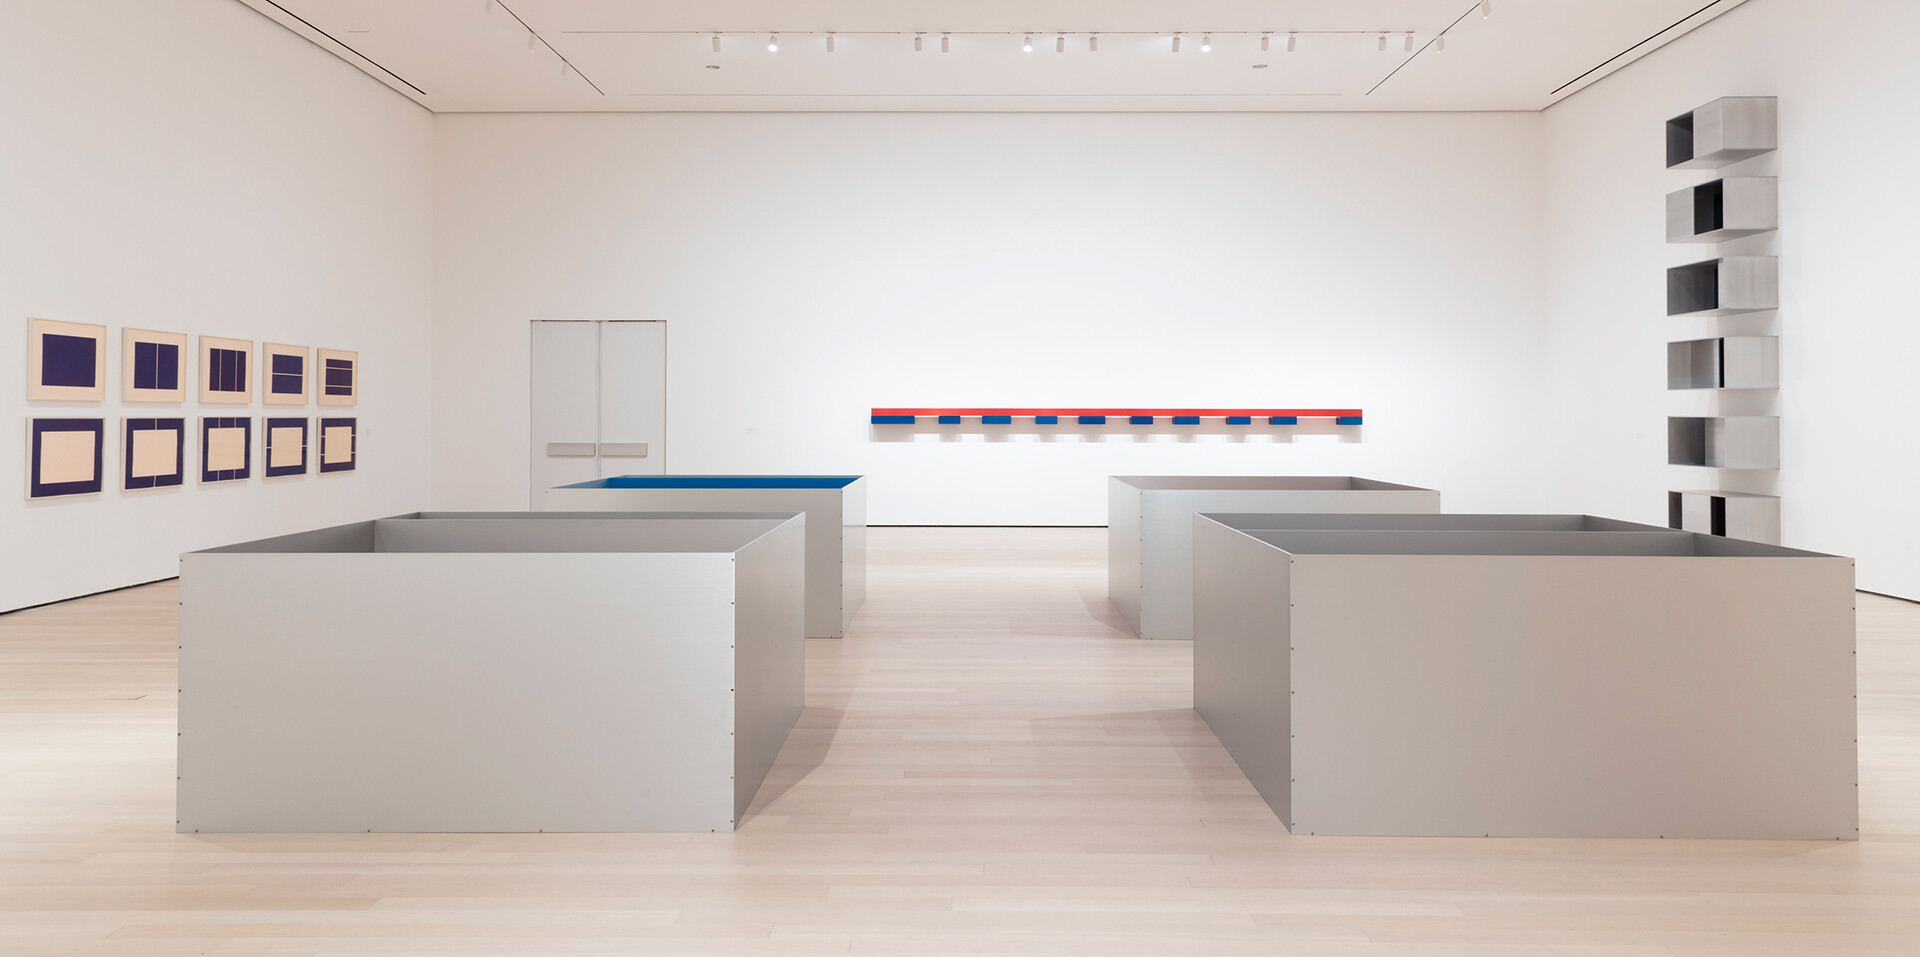 An installation view of Judd at The museum of Modern Art, New York, in 2020.